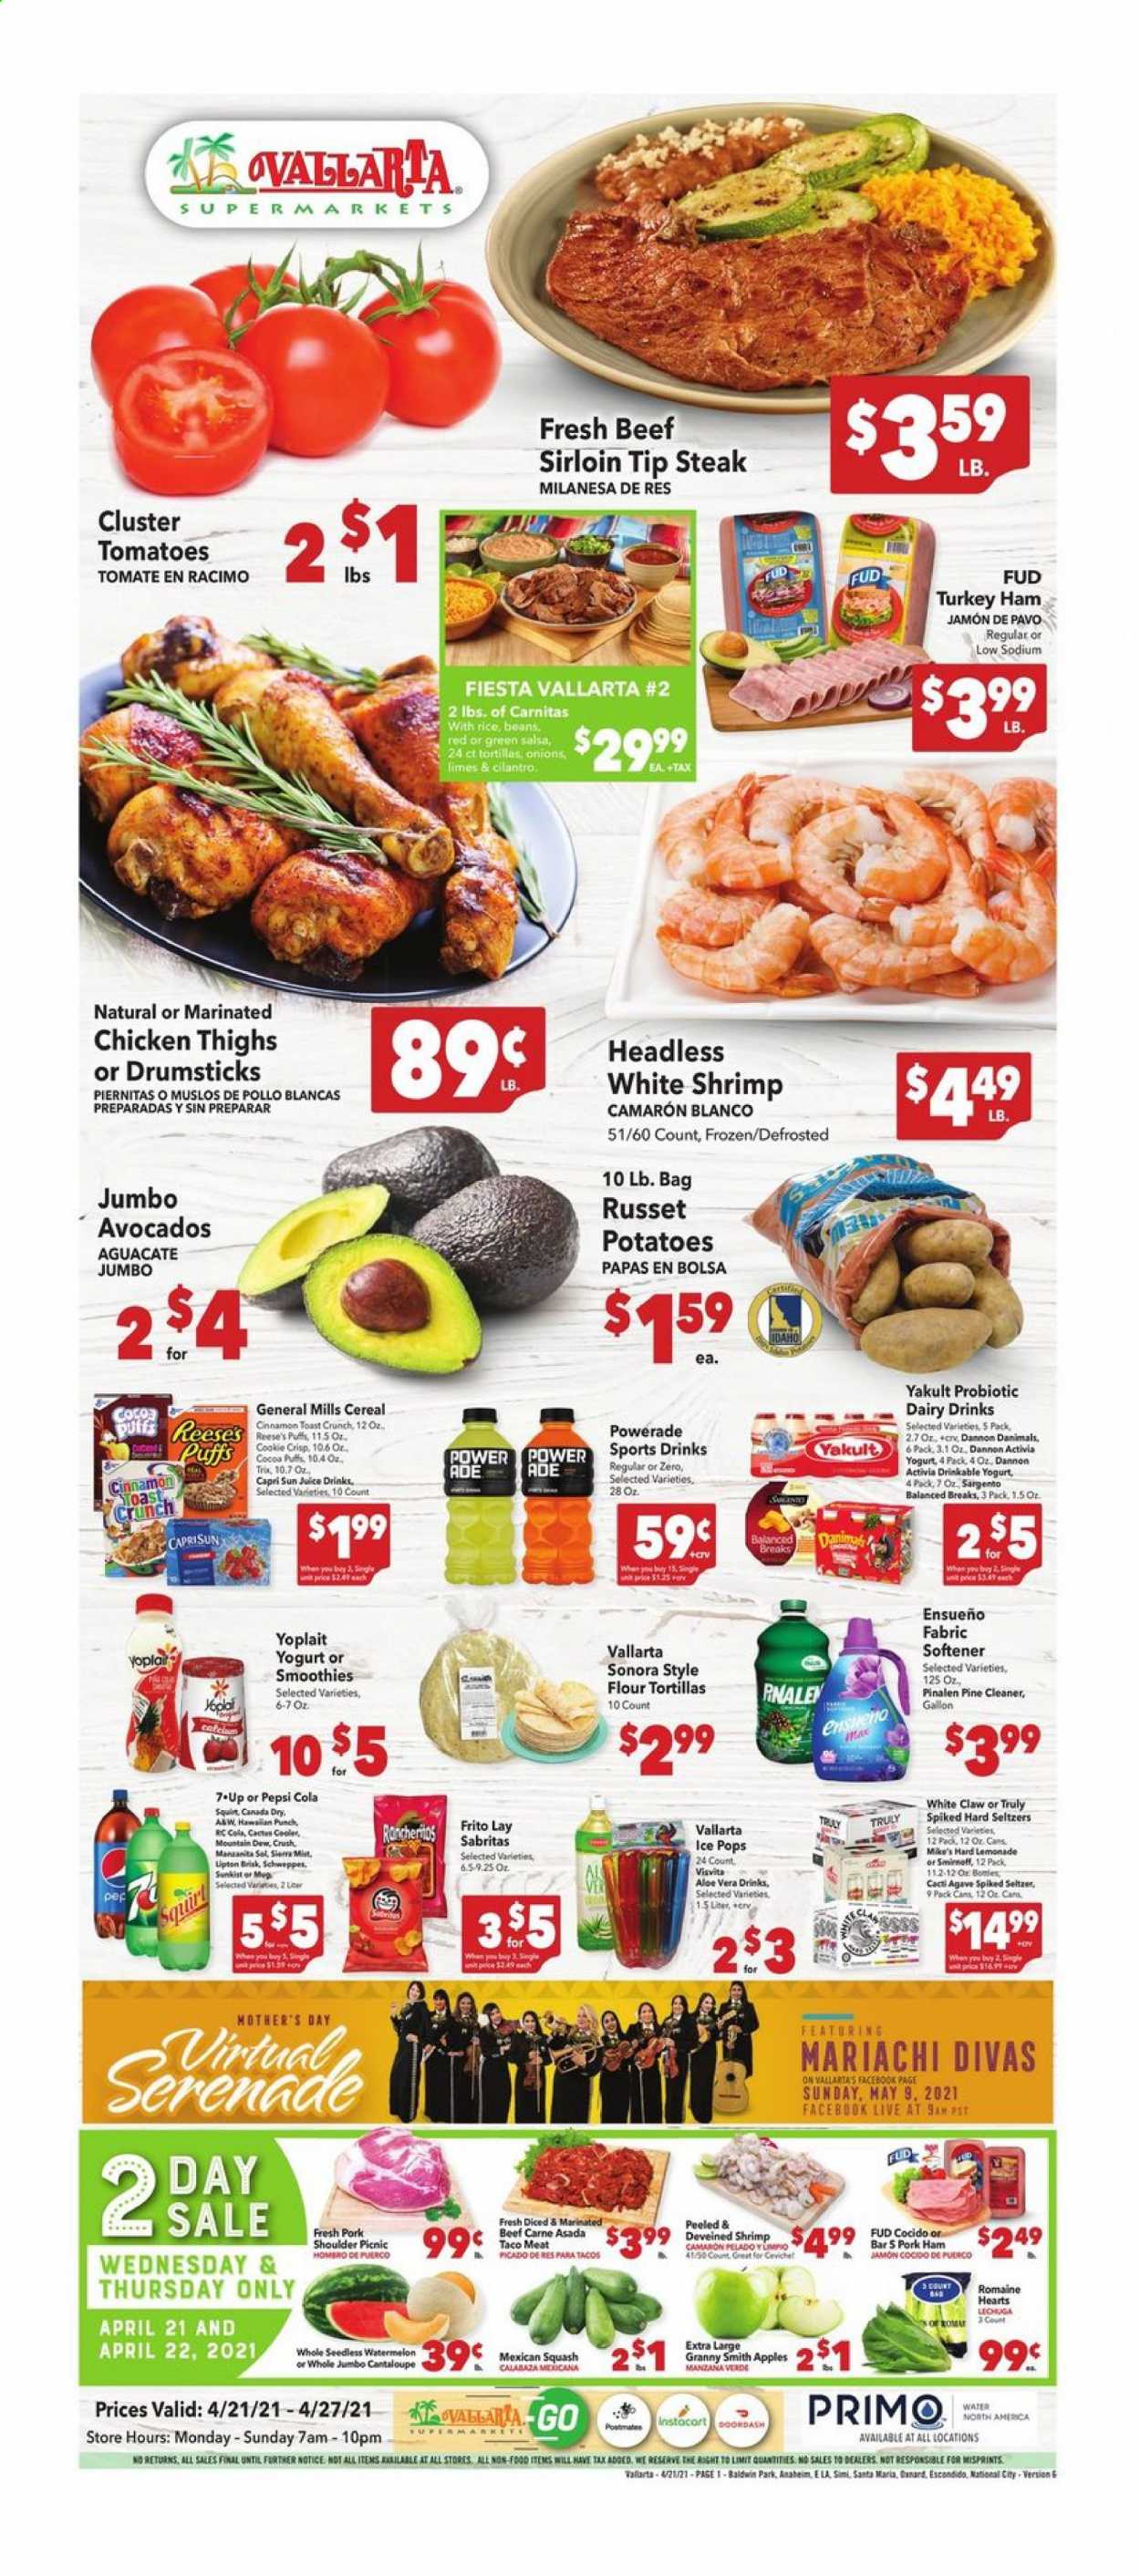 thumbnail - Vallarta Flyer - 04/21/2021 - 04/27/2021 - Sales products - tortillas, flour tortillas, puffs, cantaloupe, russet potatoes, tomatoes, potatoes, mexican squash, apples, avocado, limes, watermelon, Granny Smith, chicken thighs, marinated chicken, beef meat, beef sirloin, steak, marinated beef, pork meat, pork shoulder, shrimps, ham, Sargento, yoghurt, Activia, Yoplait, Dannon, Danimals, Reese's, cereals, Trix, cilantro, cinnamon, salsa, Canada Dry, Capri Sun, lemonade, Mountain Dew, Schweppes, Powerade, Pepsi, juice, 7UP, Smirnoff, punch, White Claw, TRULY, cleaner, fabric softener. Page 1.